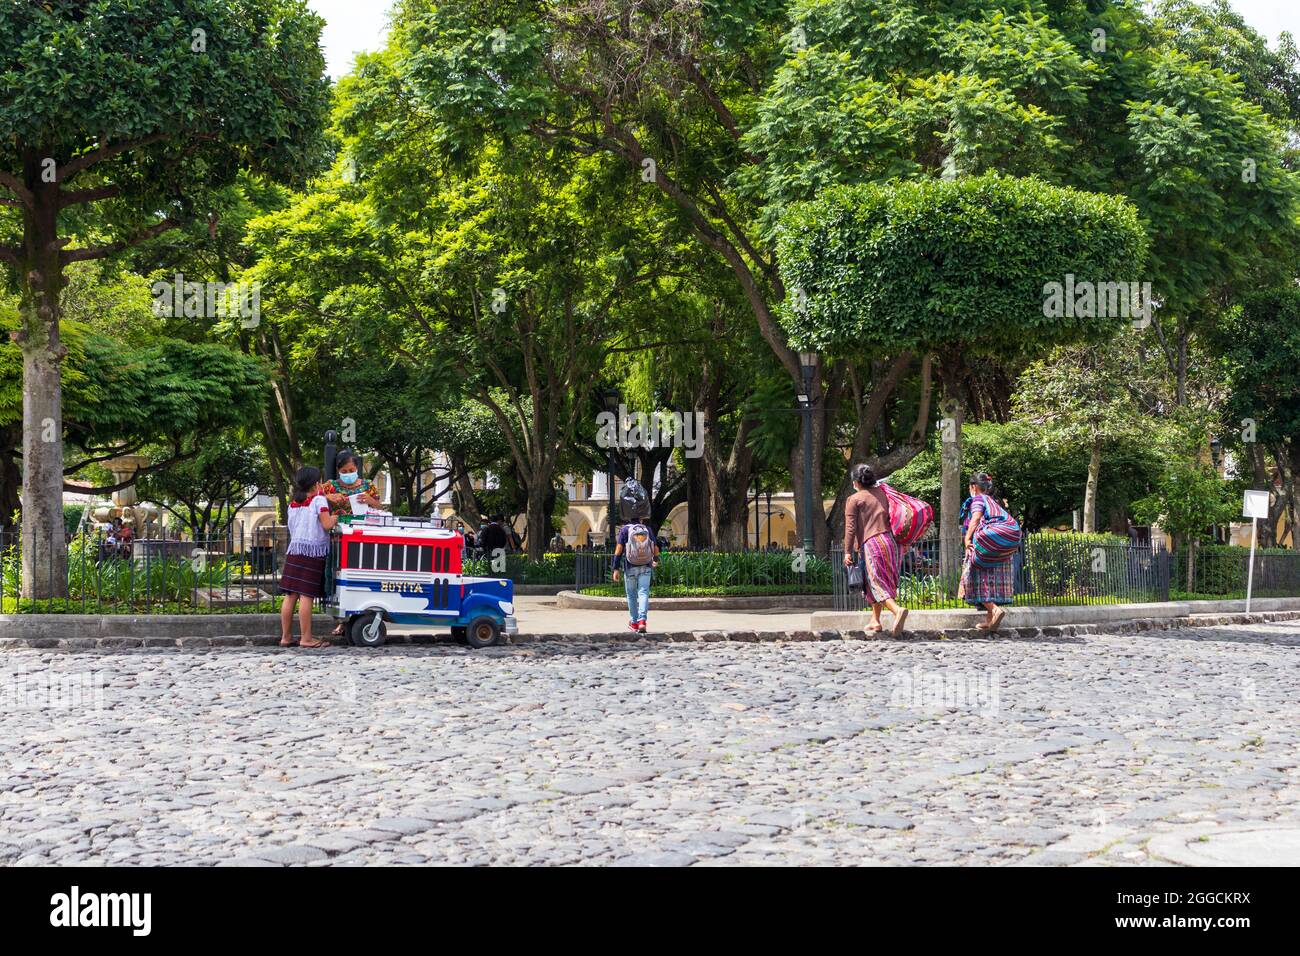 guatemalan woman selling ice cream on the park with a colorful cart Stock Photo